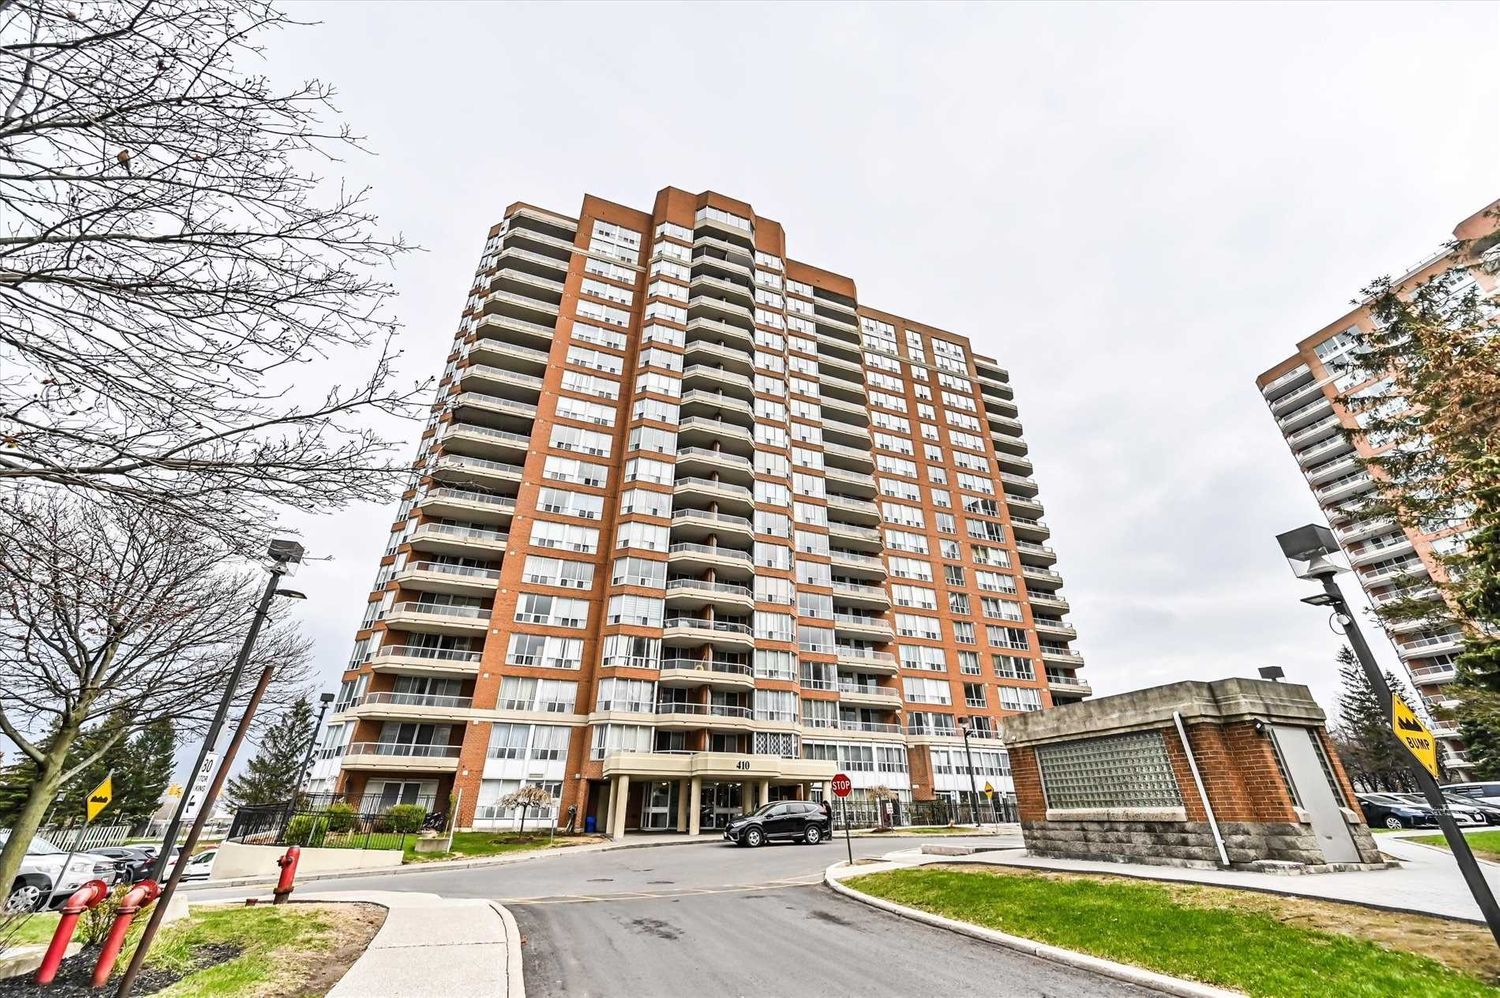 410 Mclevin Avenue. Mayfair on the Green II Condos is located in  Scarborough, Toronto - image #2 of 3